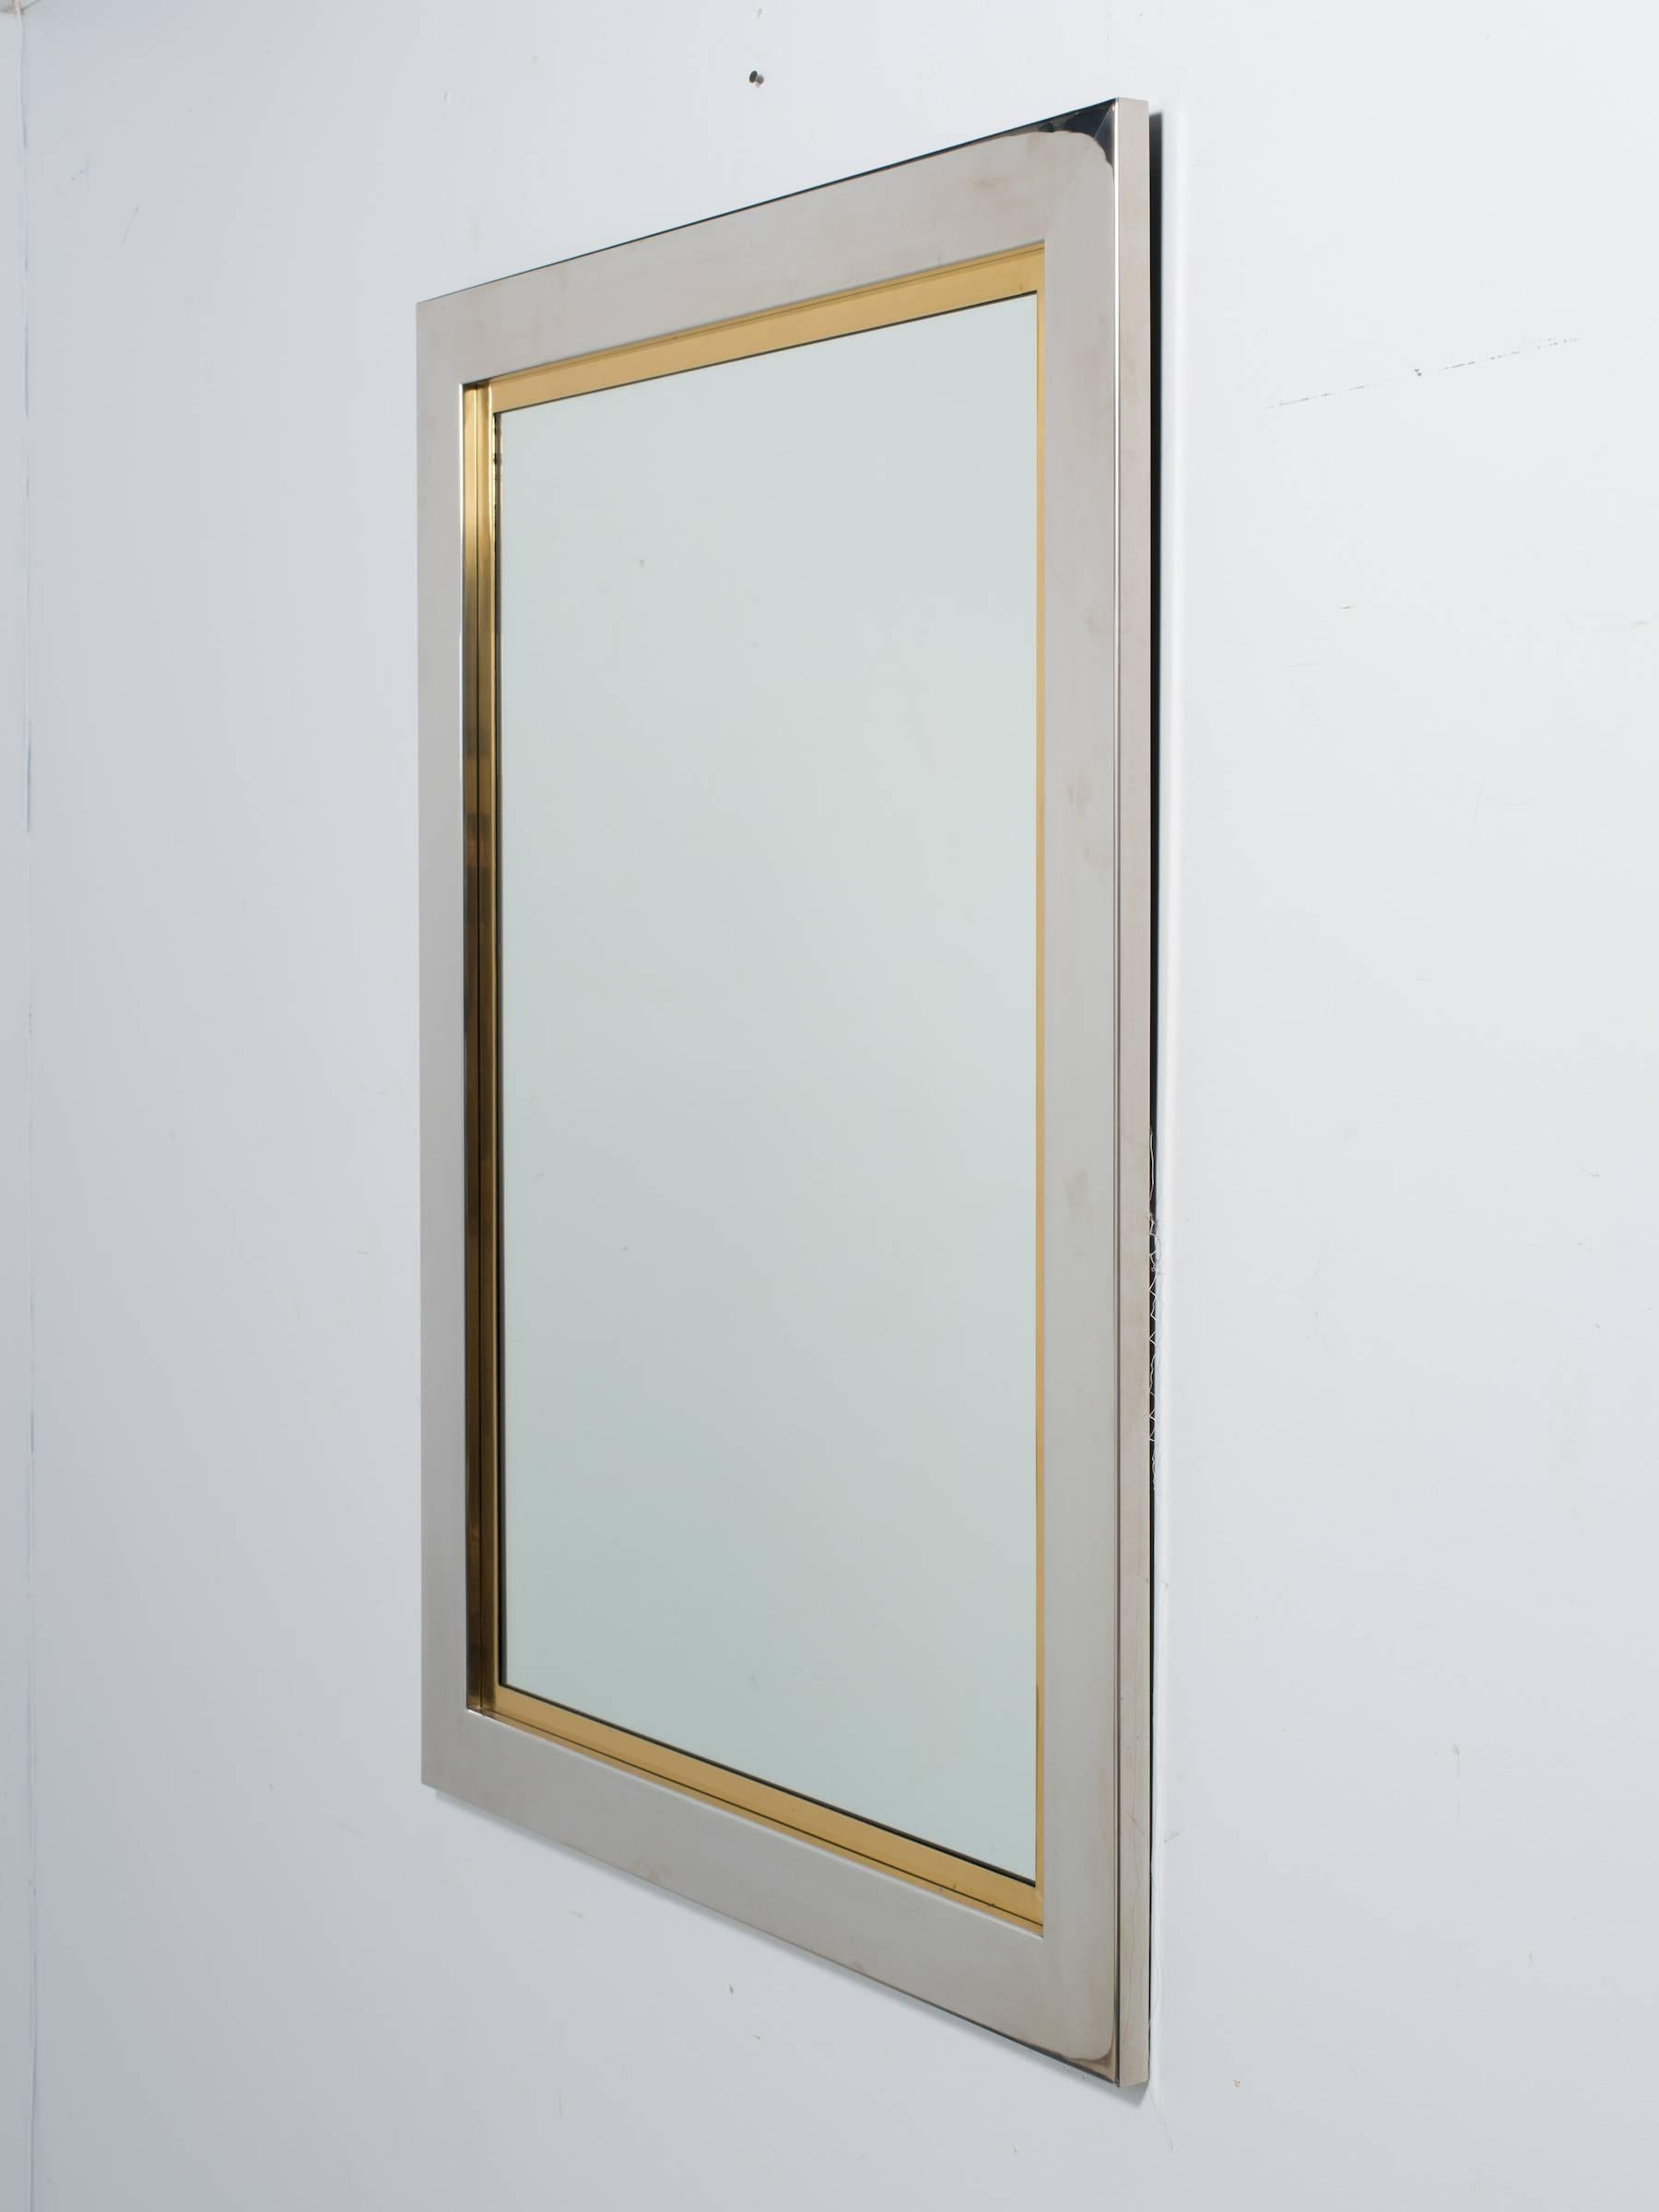 1970s chrome and brass wall mirror.